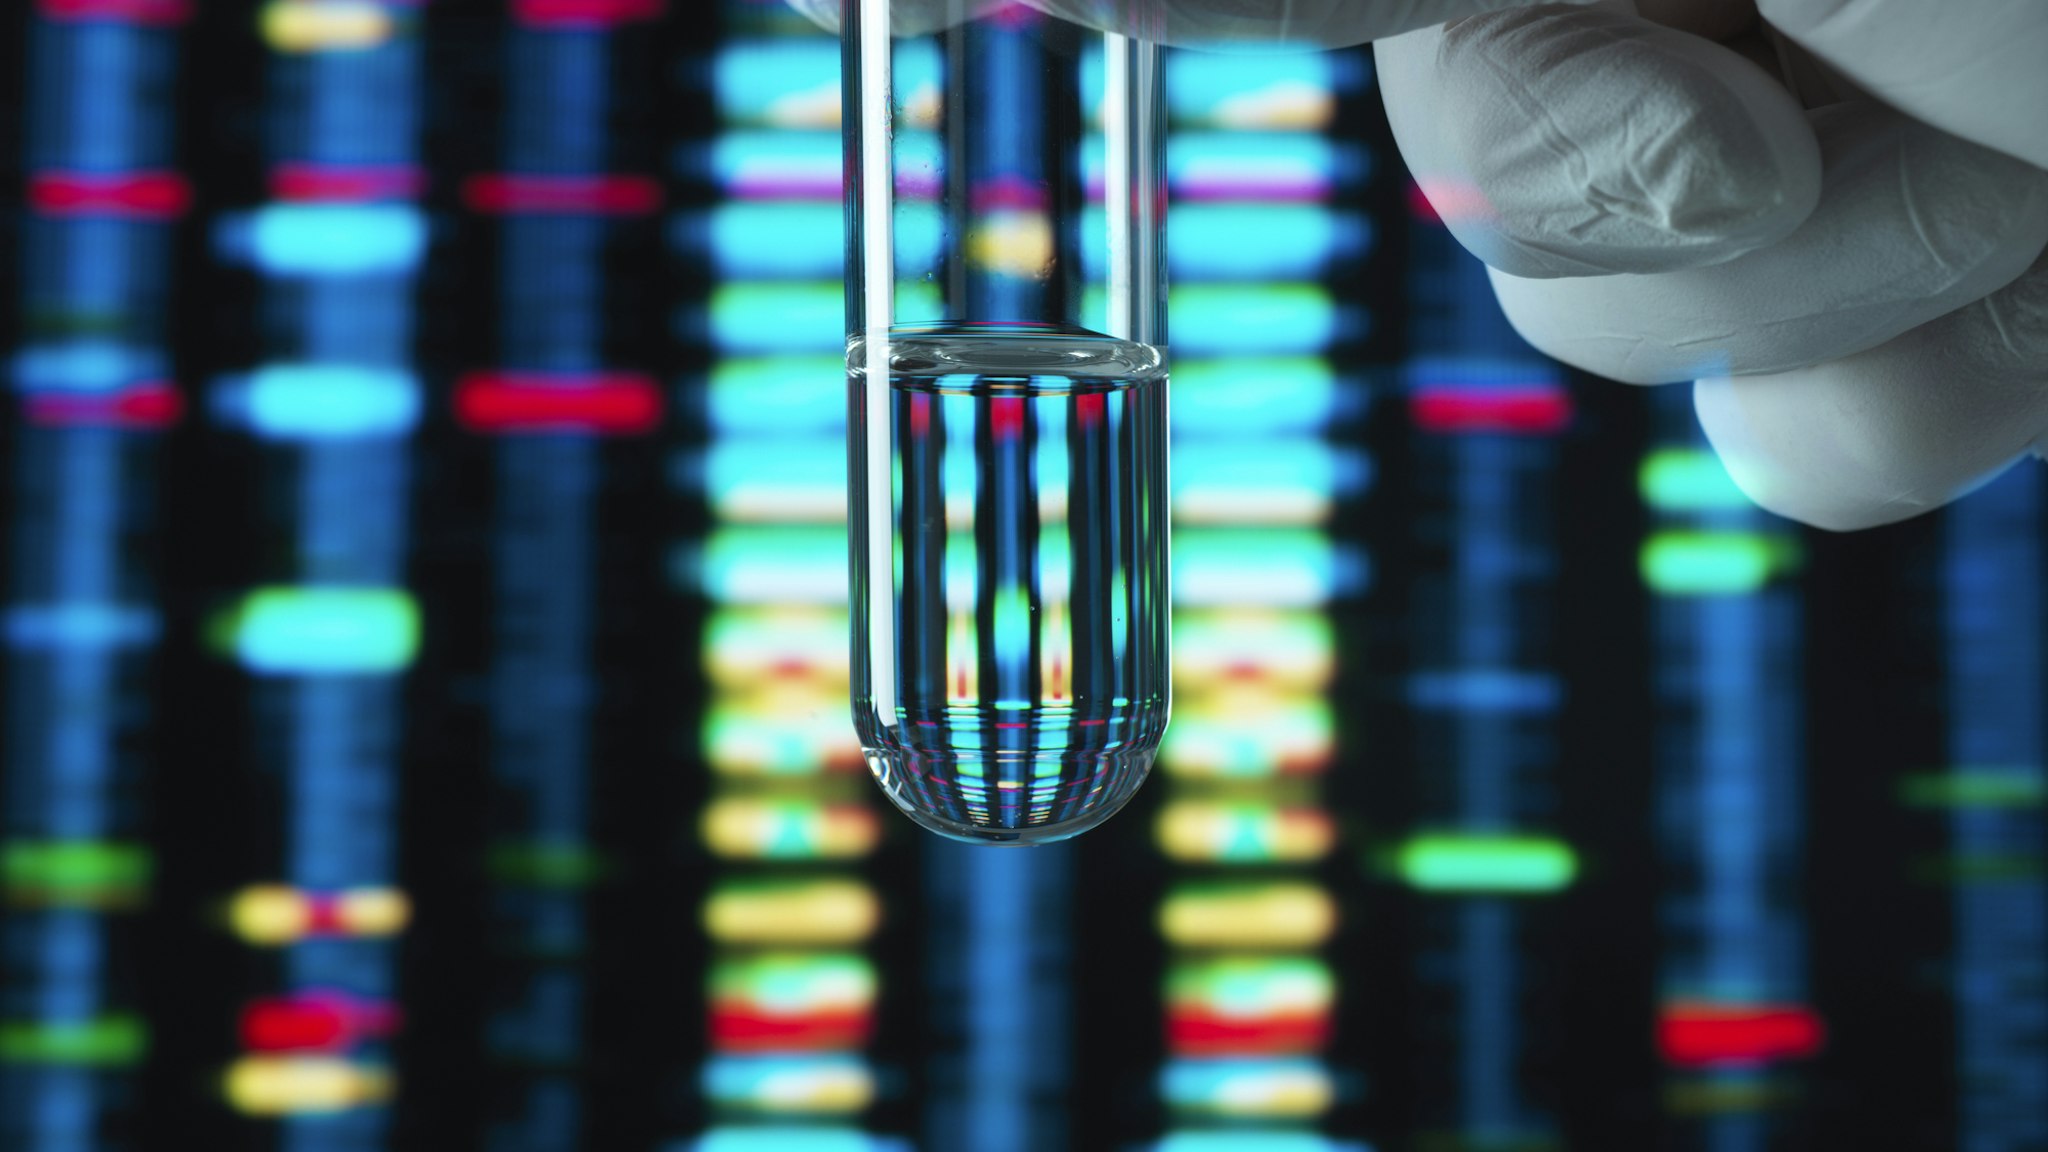 Genetic Research, DNA profile reflected in a test tube containing a sample - stock photo